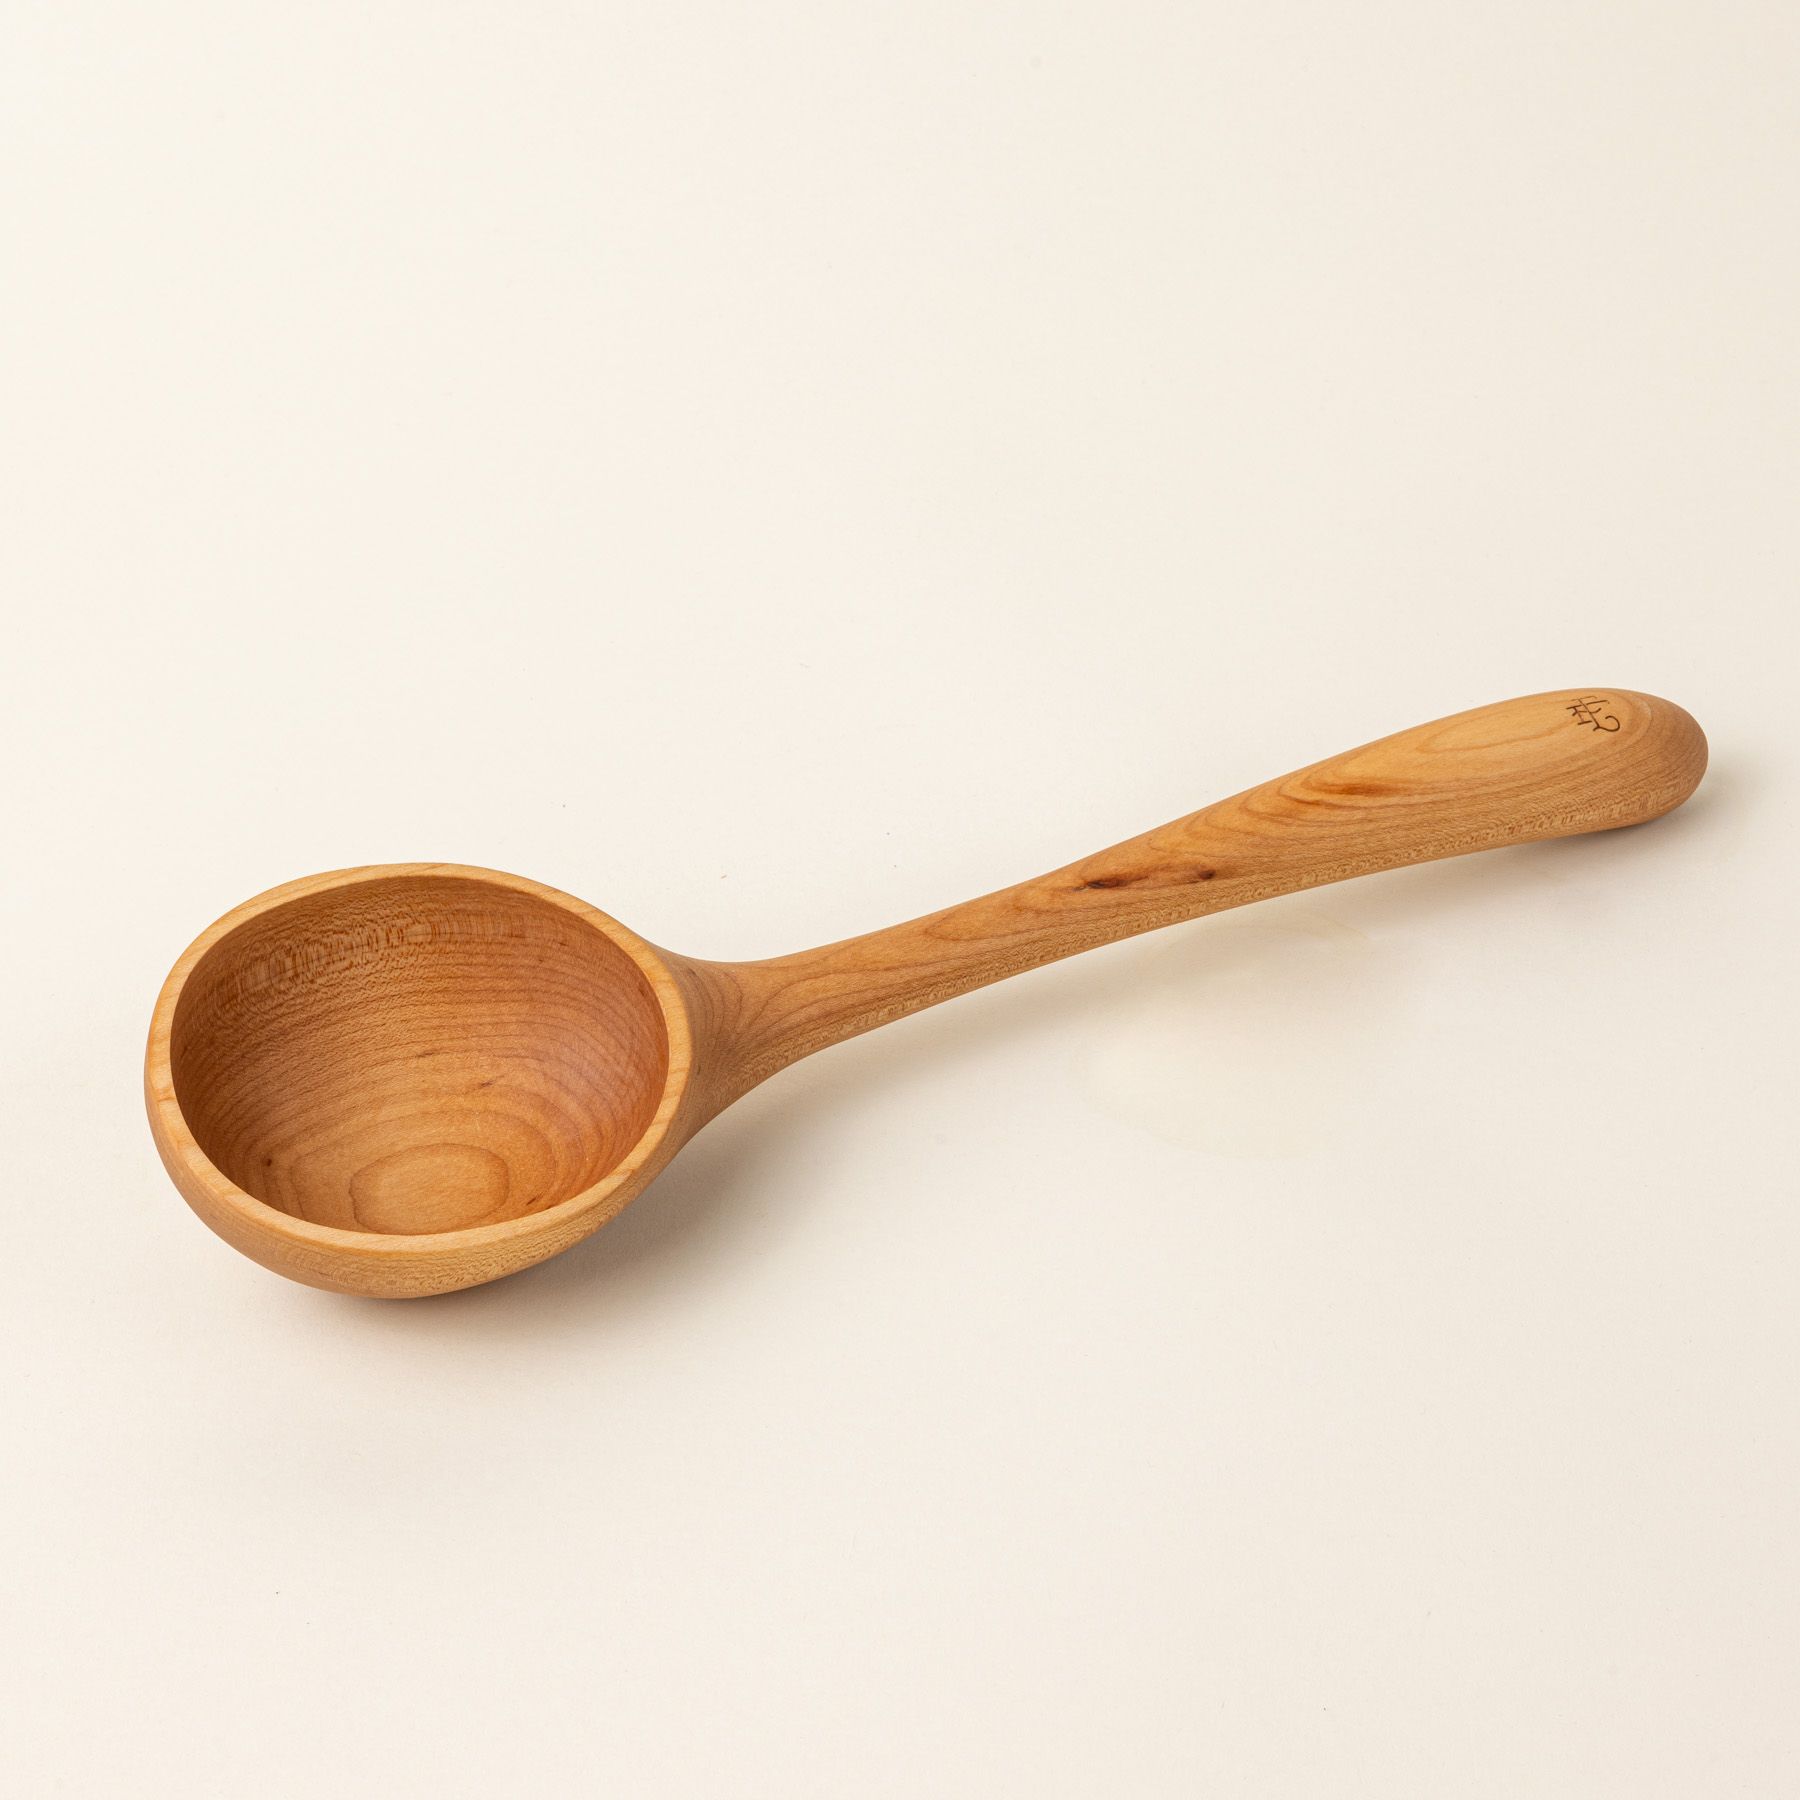 A wooden ladle with a large scoop